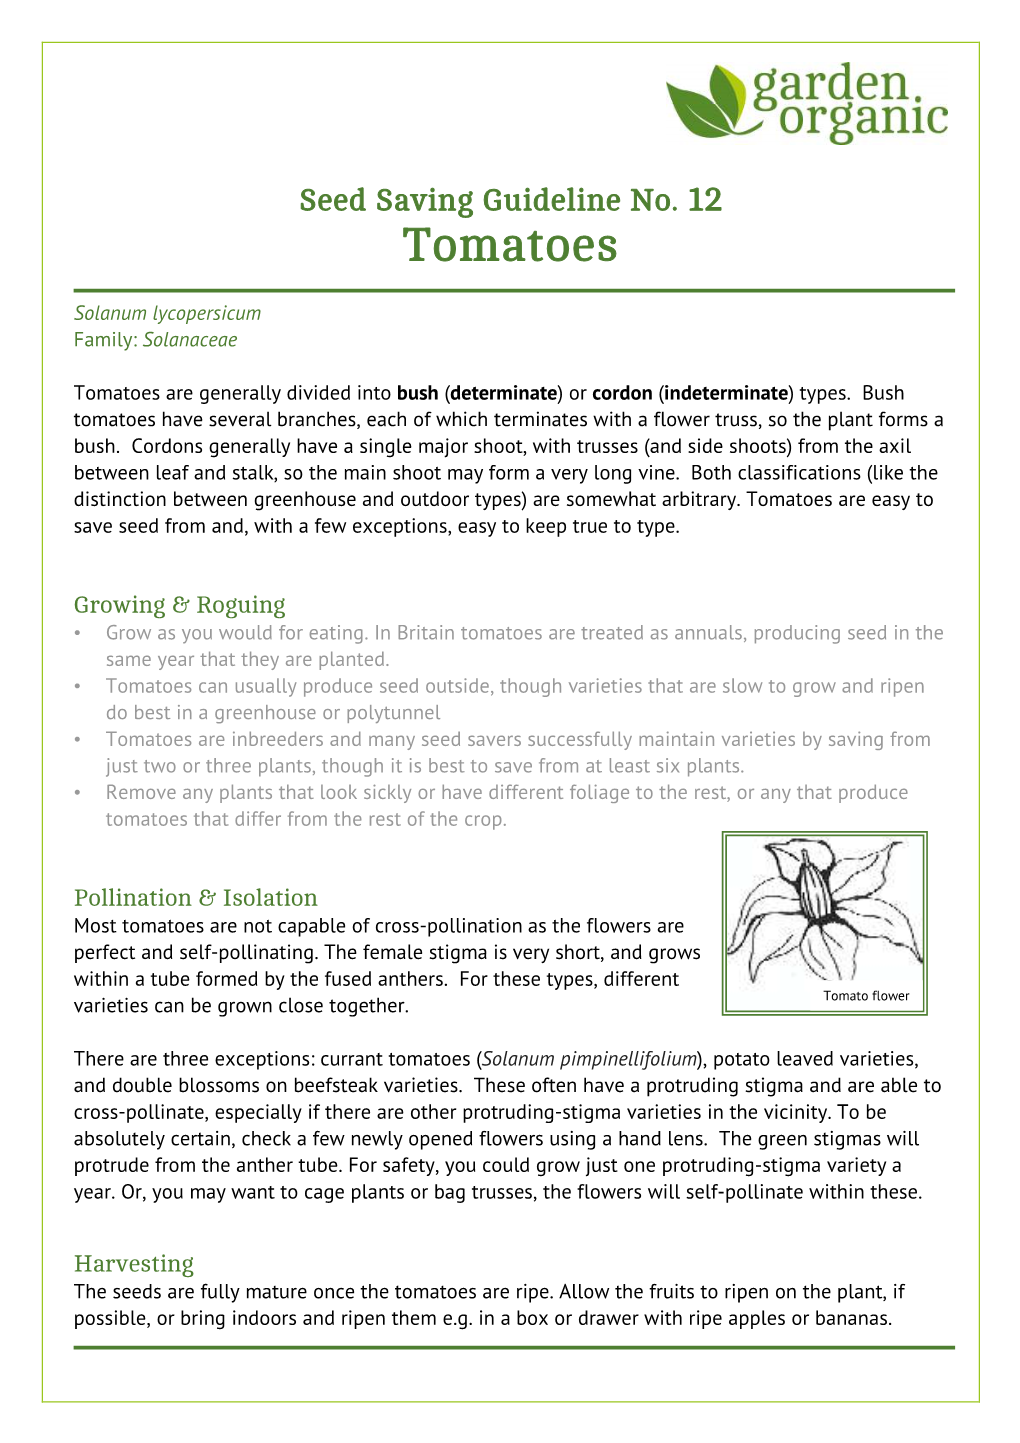 Seed Saving Guideline No. 12 Tomatoes